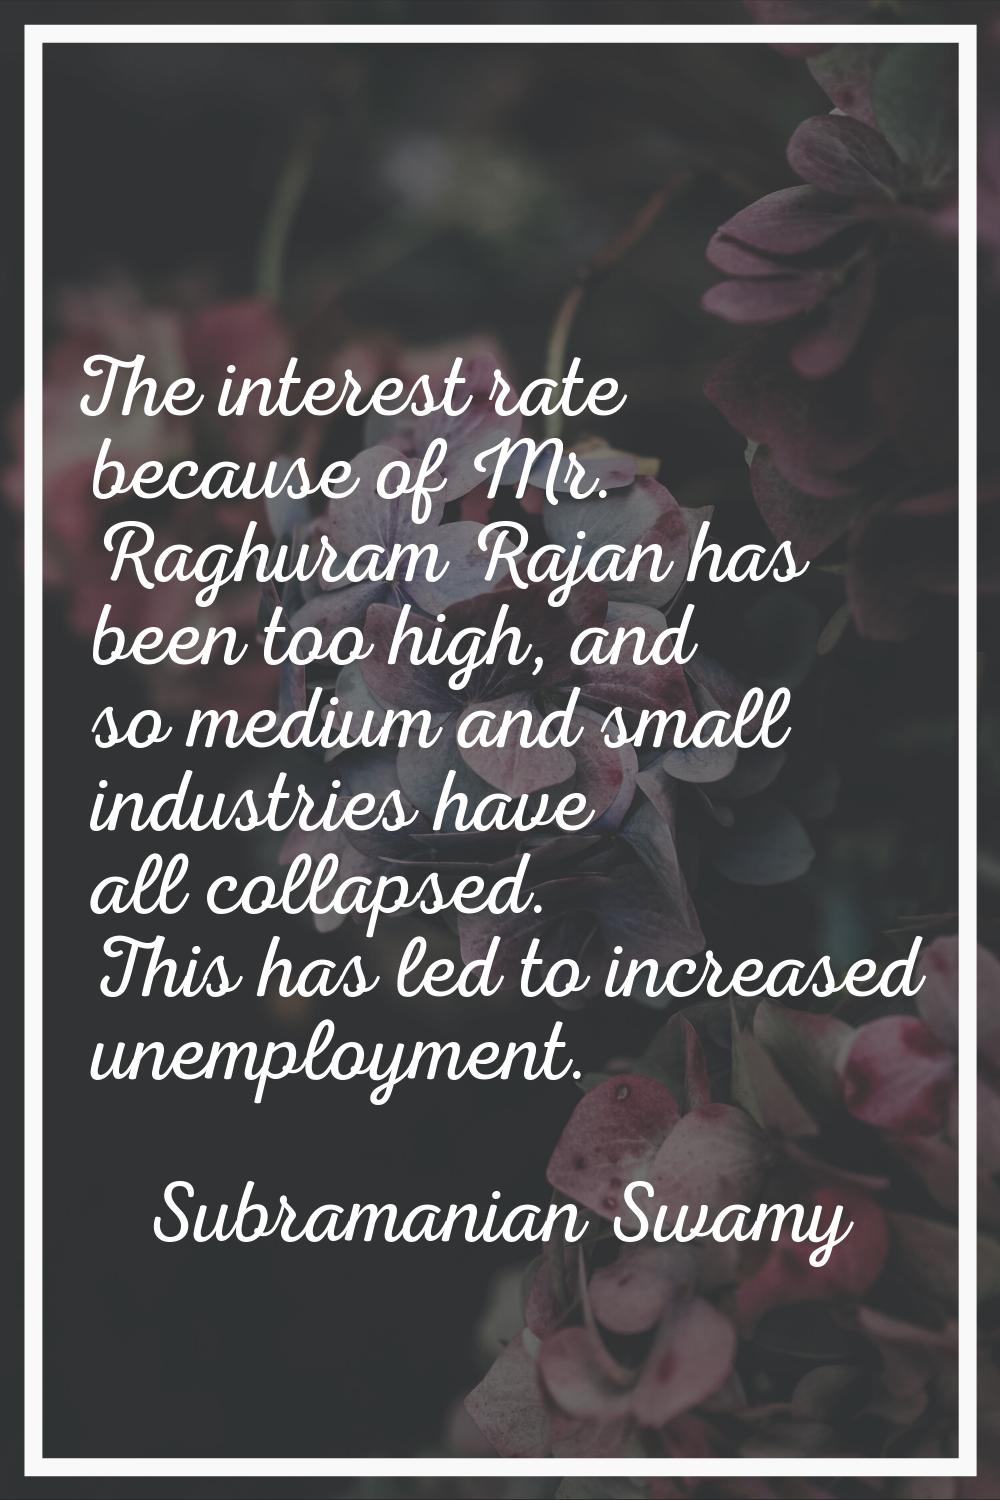 The interest rate because of Mr. Raghuram Rajan has been too high, and so medium and small industri